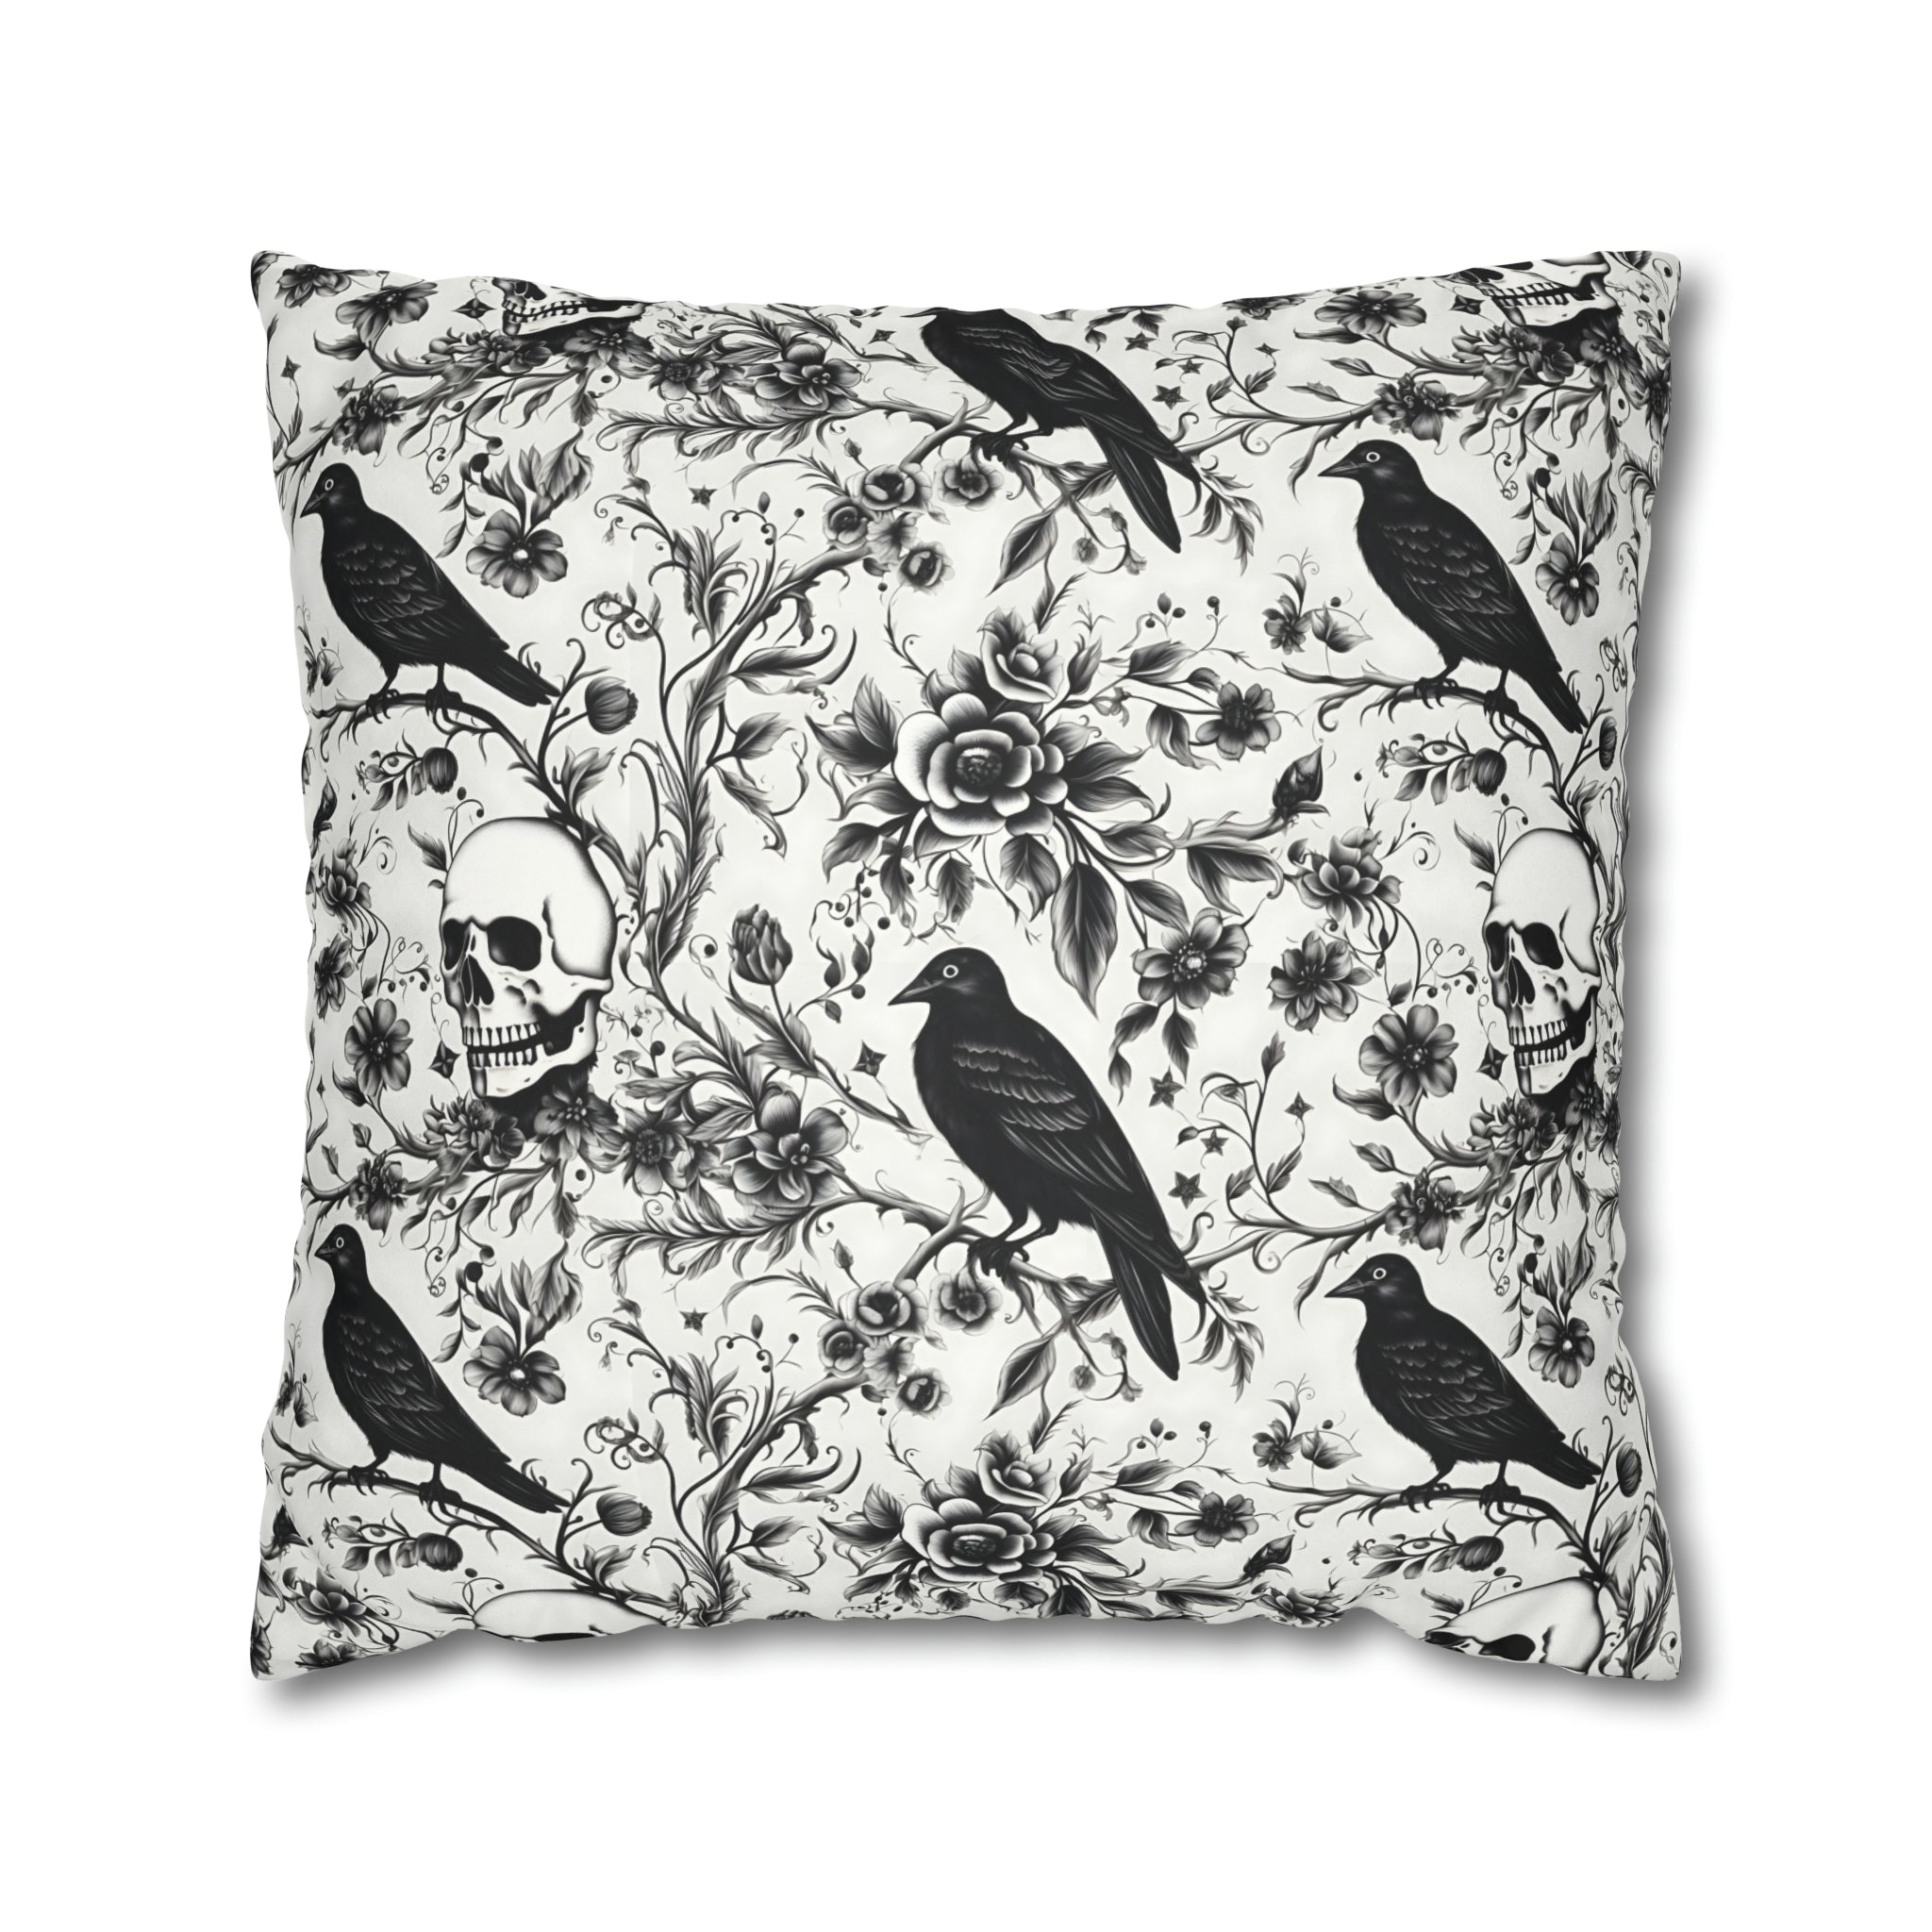 Raven Skull Garden Faux Suede Pillow Cover: Gothic Floral